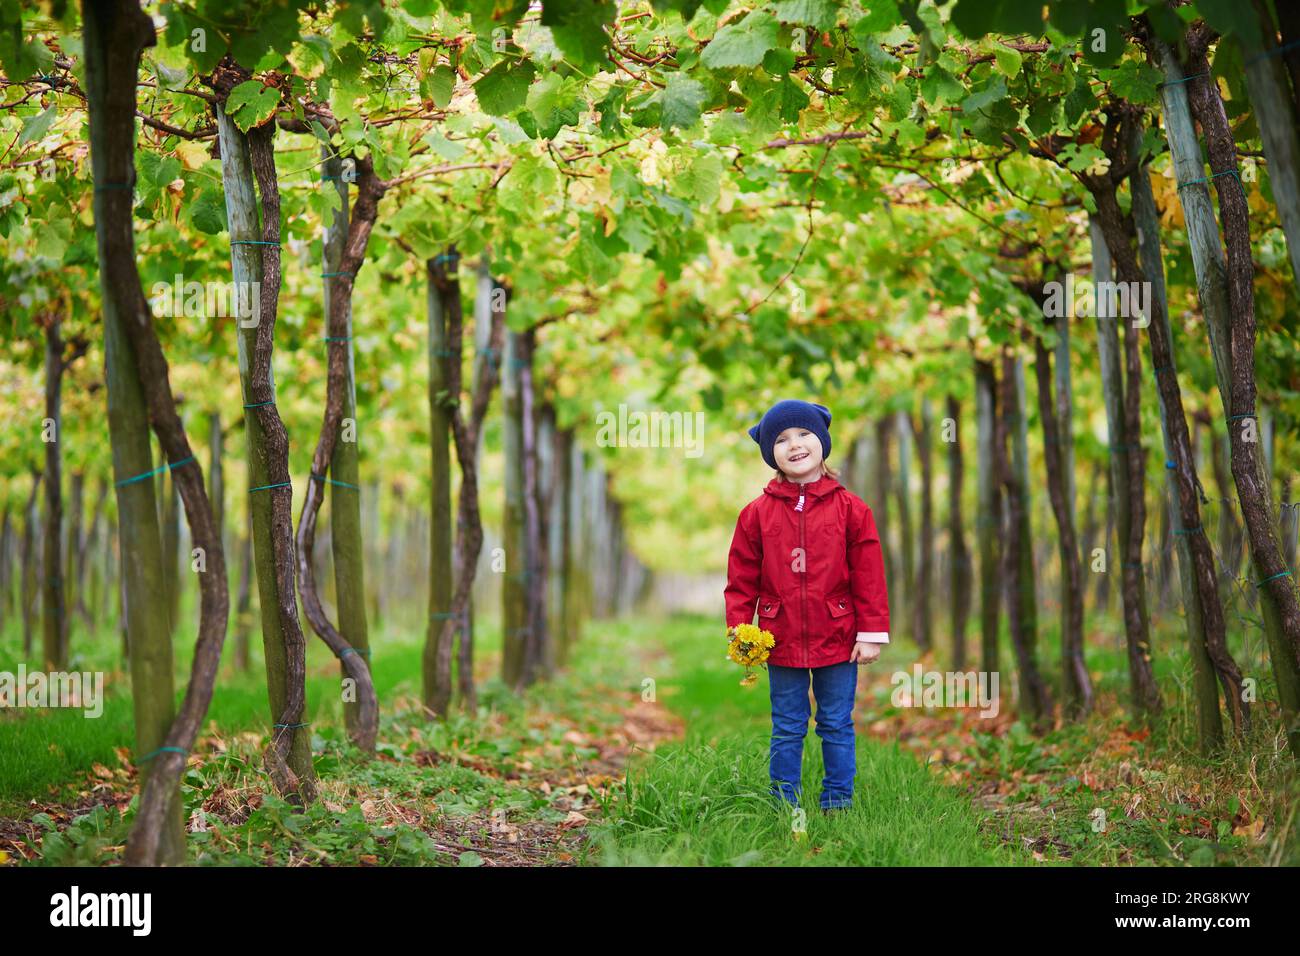 Little girl walking through grape vines on a farm. Child playing in ...